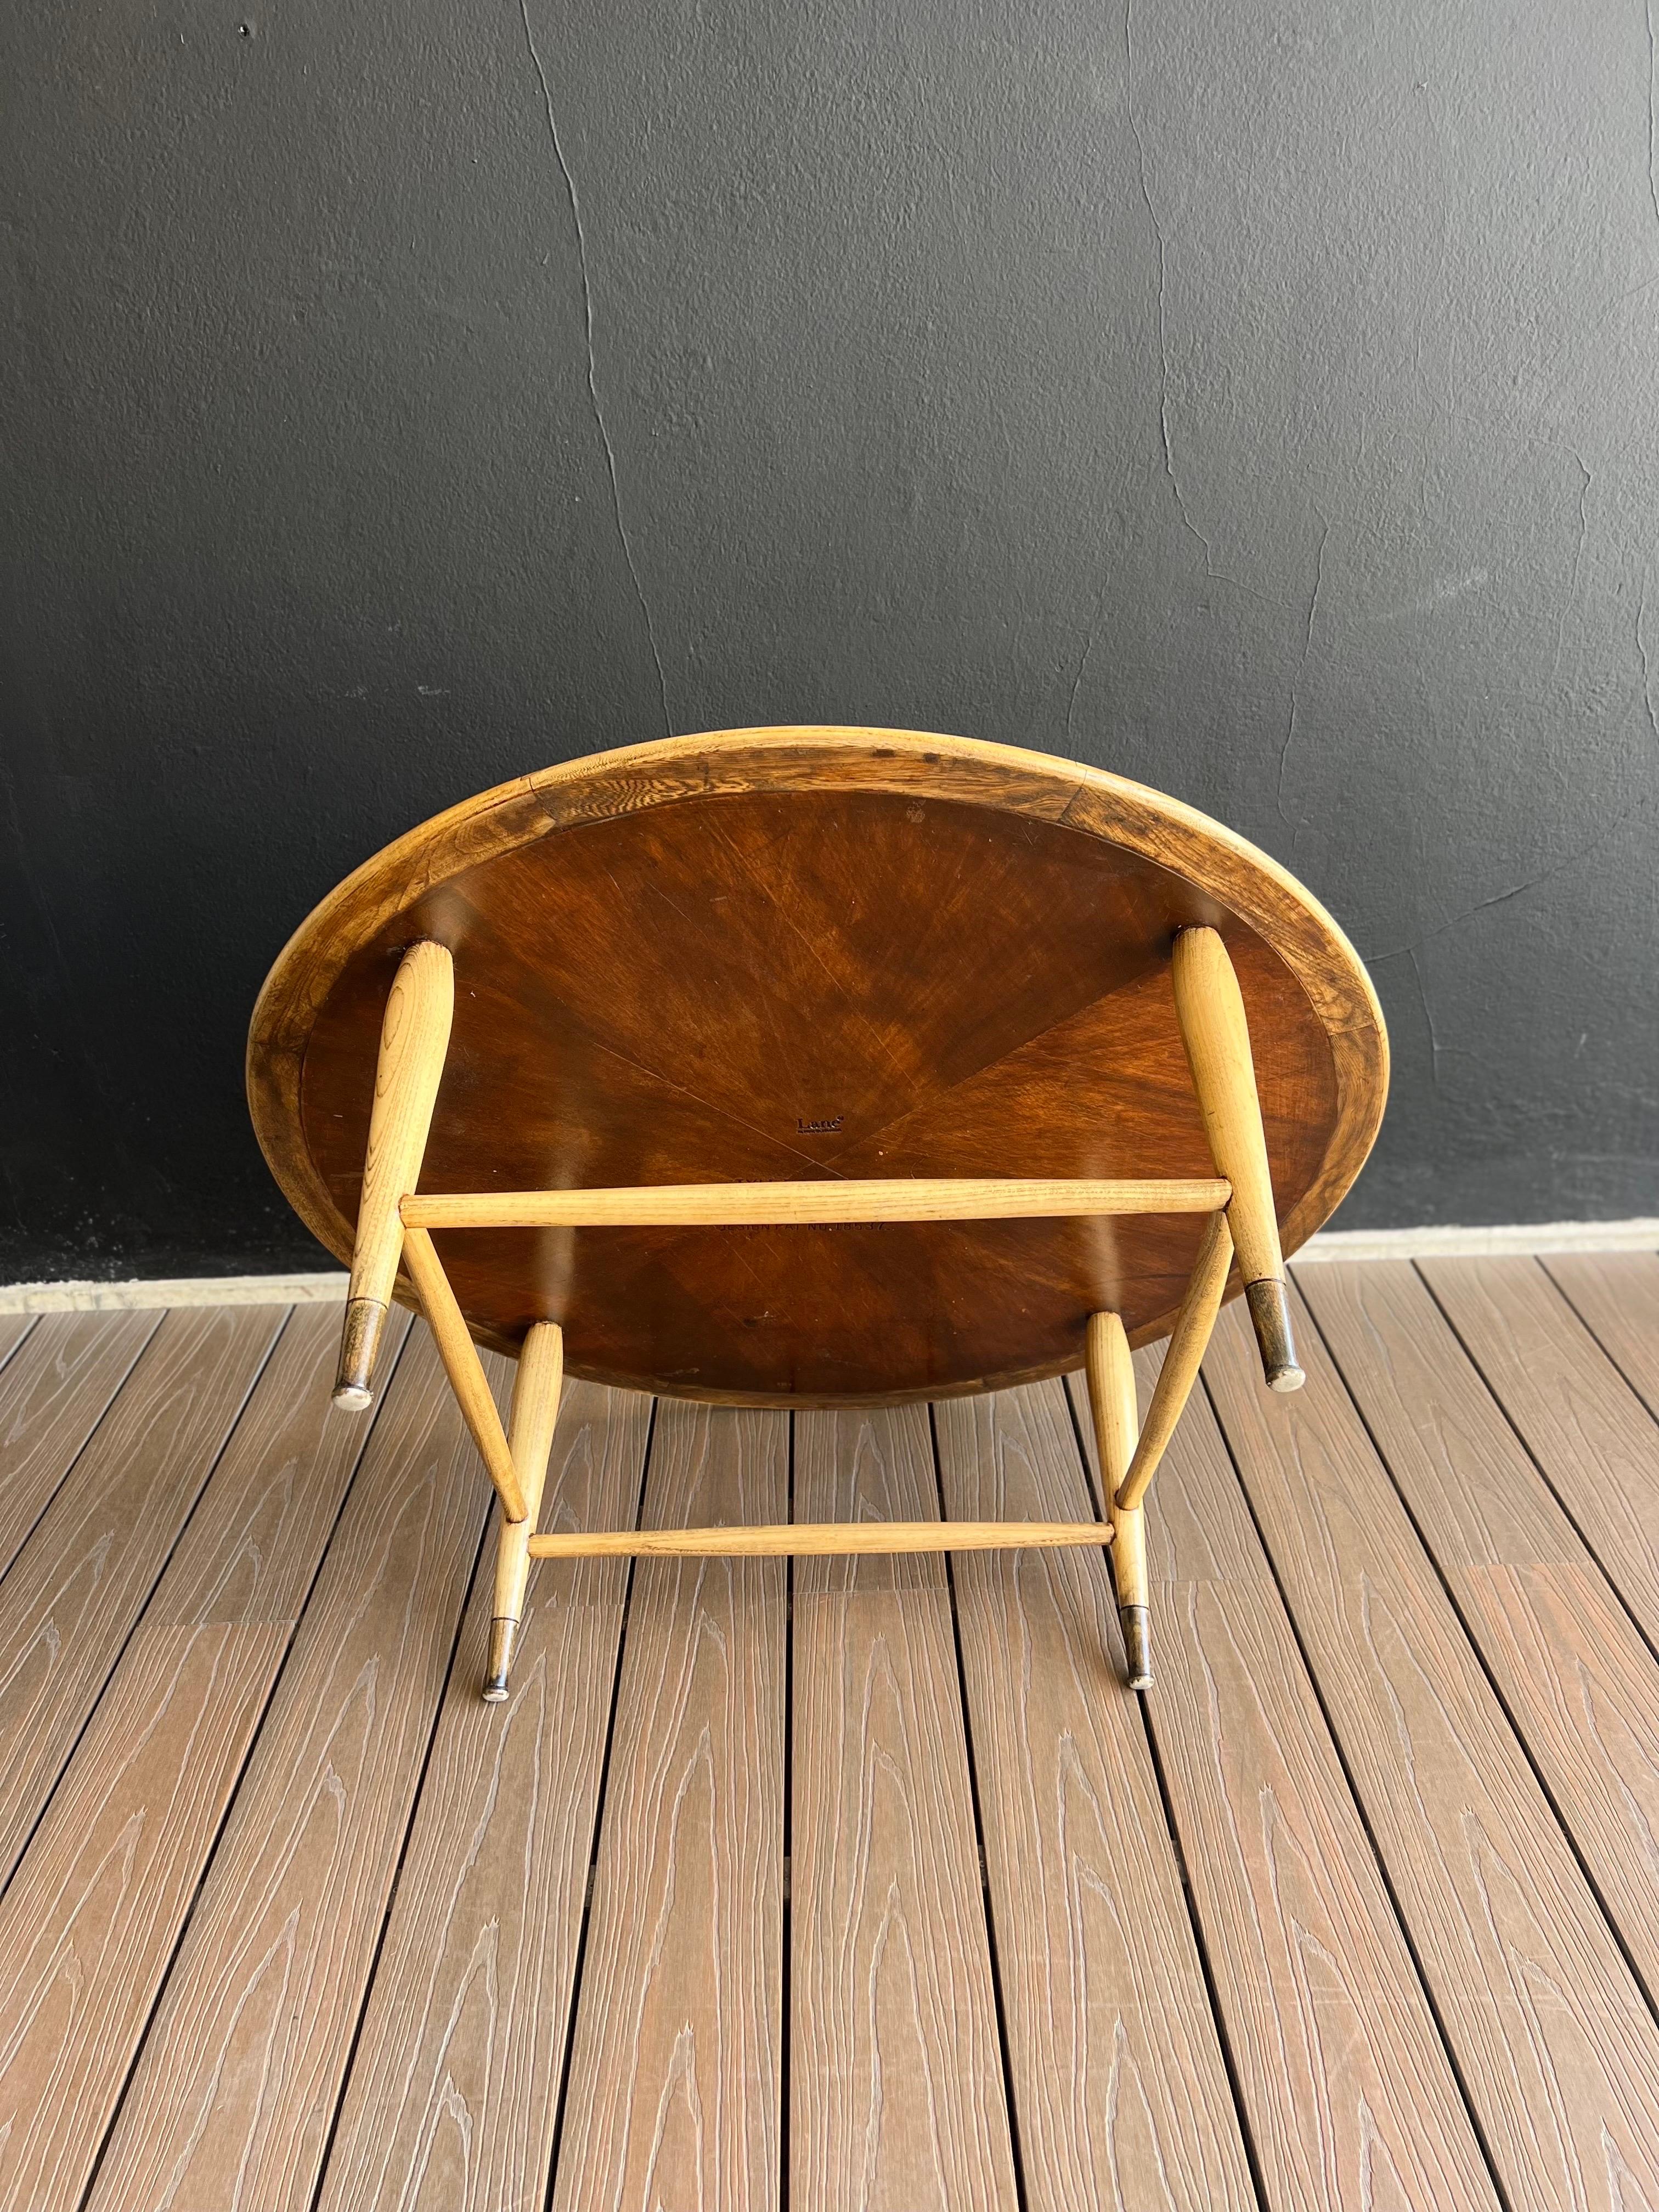 Mid-20th Century Mid-Century Modern Lane Acclaim Round Dovetail Coffee Table For Sale